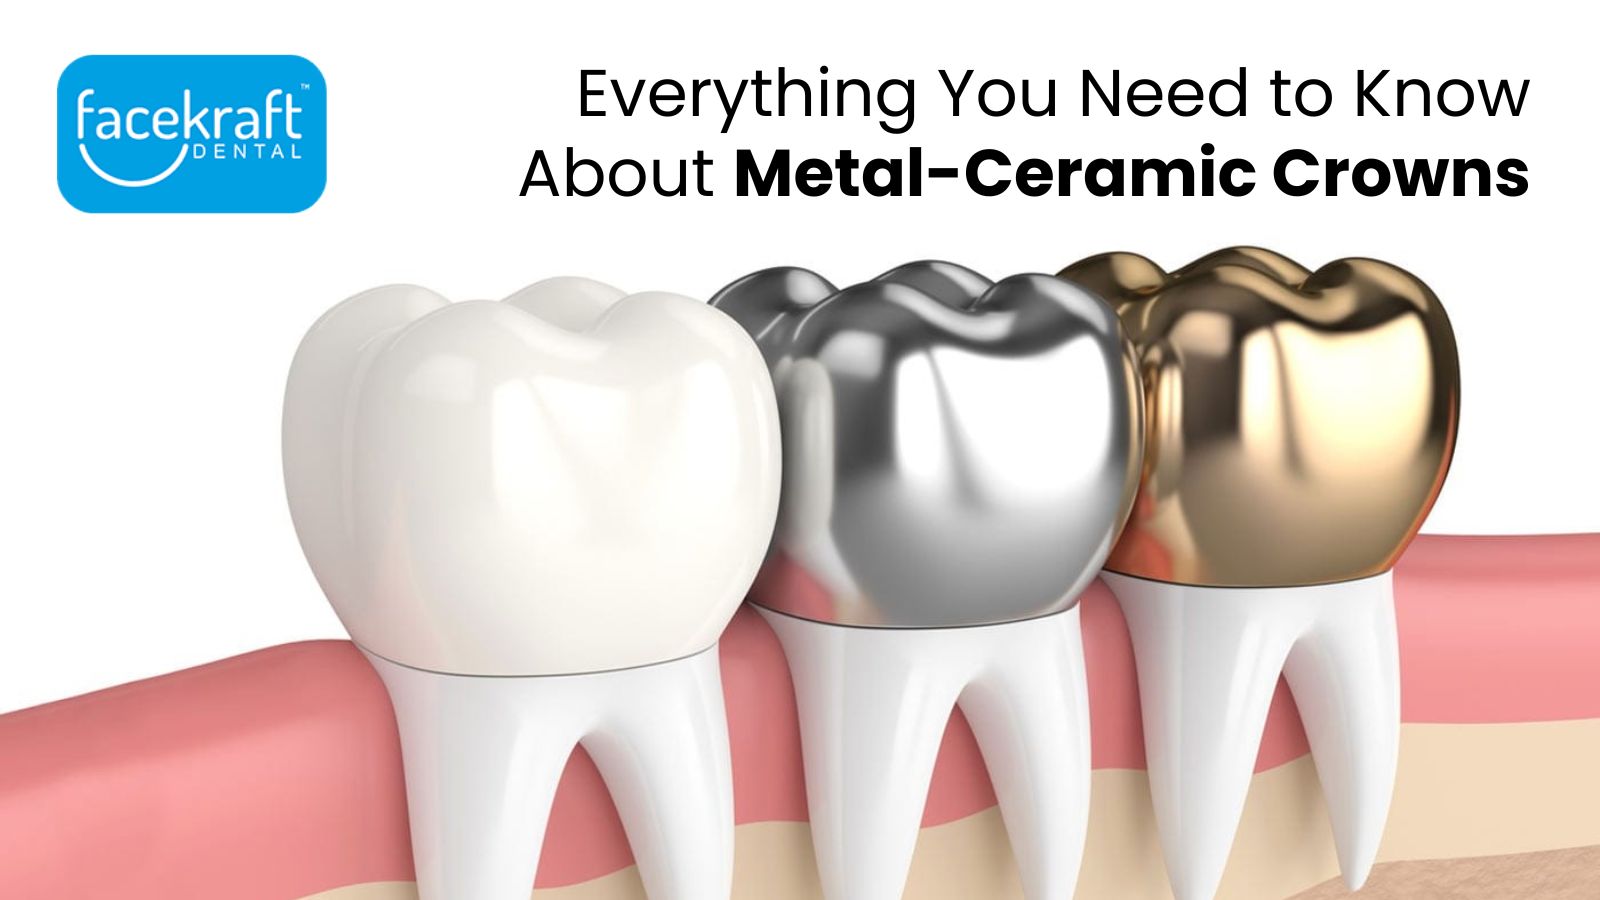 Everything You Need to Know About Metal-Ceramic Crowns